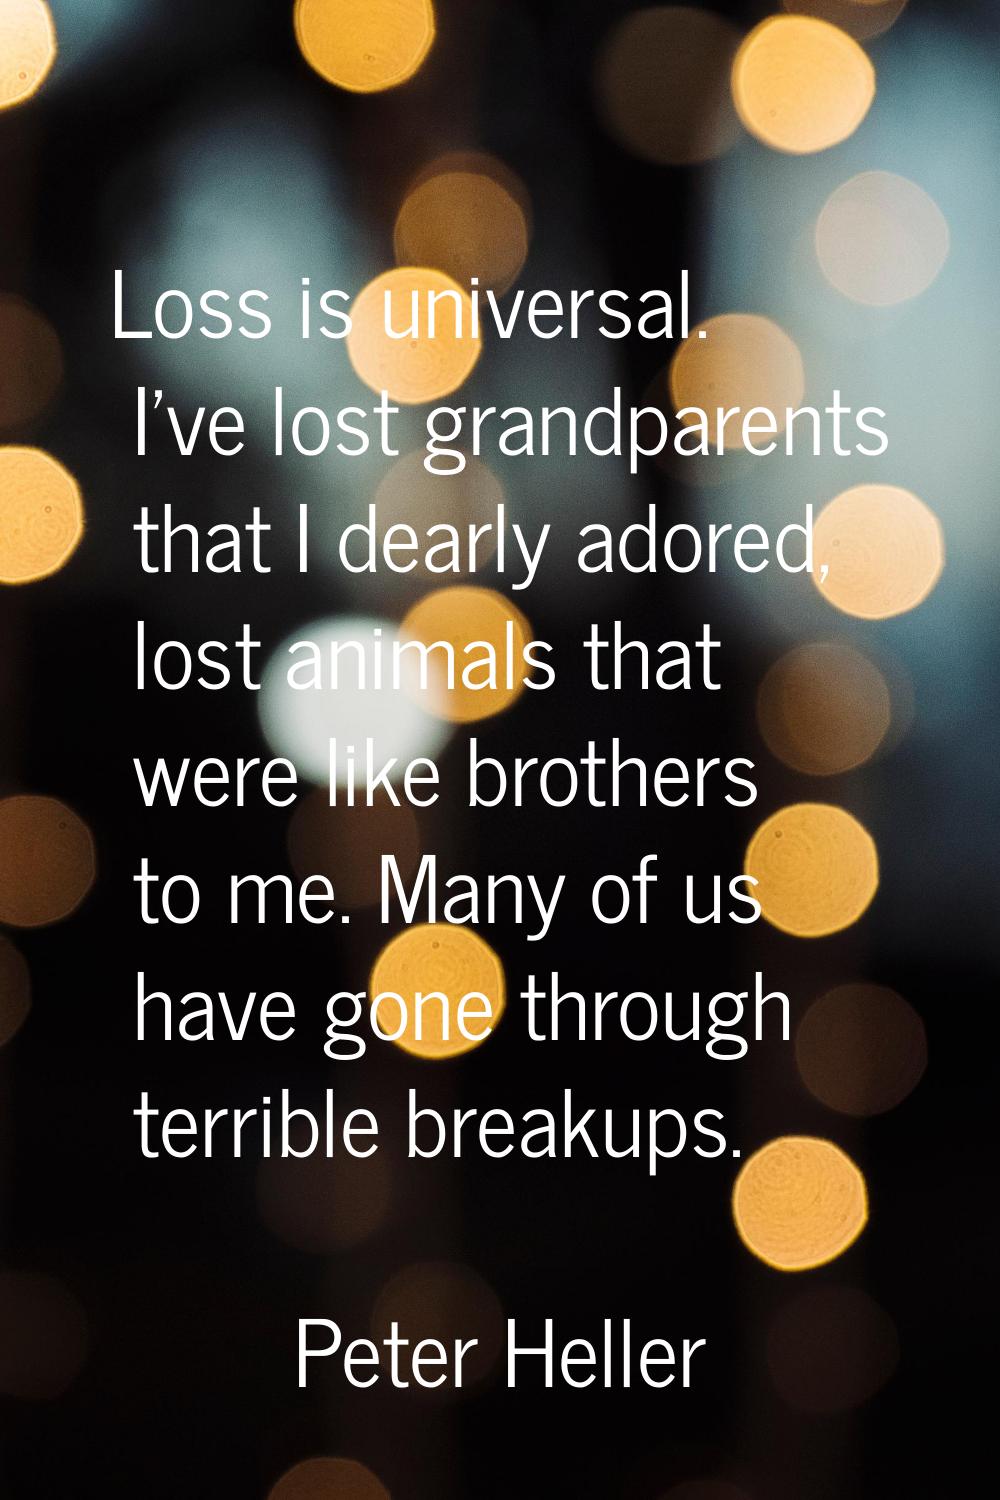 Loss is universal. I've lost grandparents that I dearly adored, lost animals that were like brother